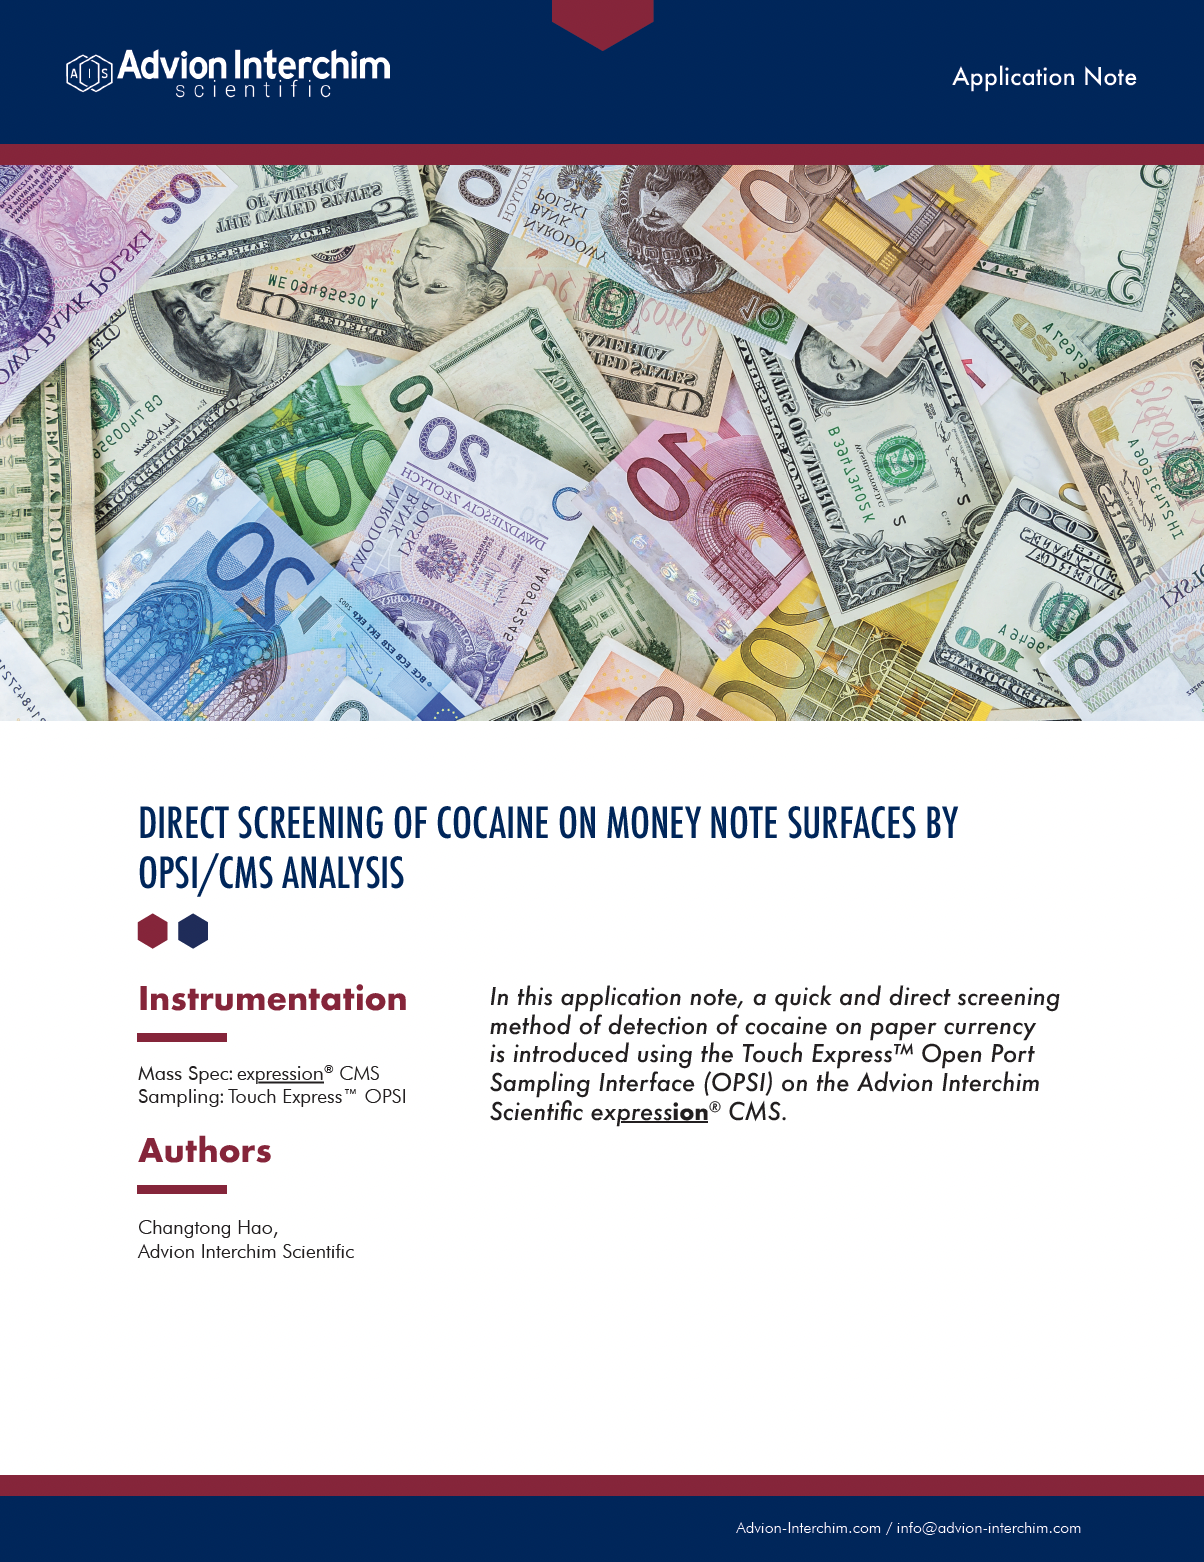 Direct Screening of Illicit Drugs on Paper Currency by OPSI/CMS Analysis